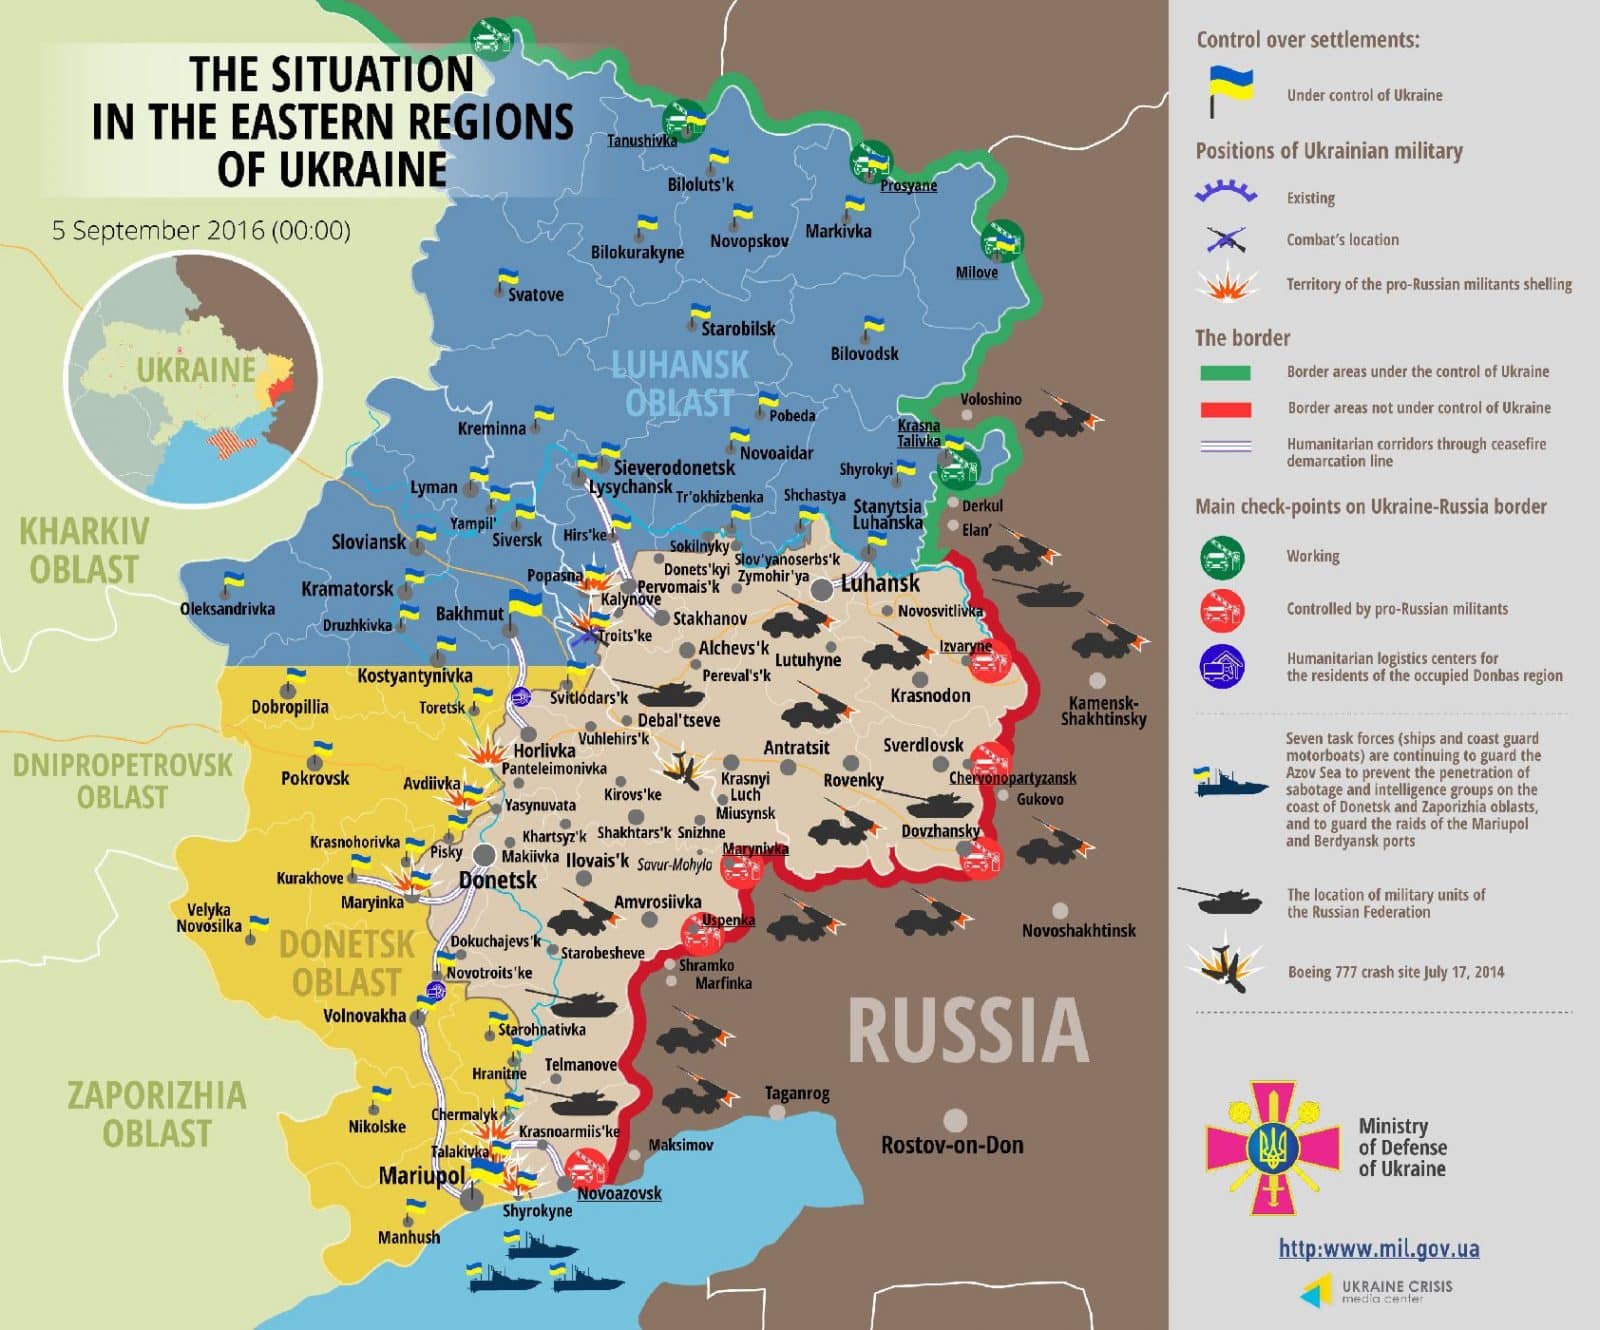 ”Silence mode in Donbas”: Russian troops attack 20 times in past 24 hours